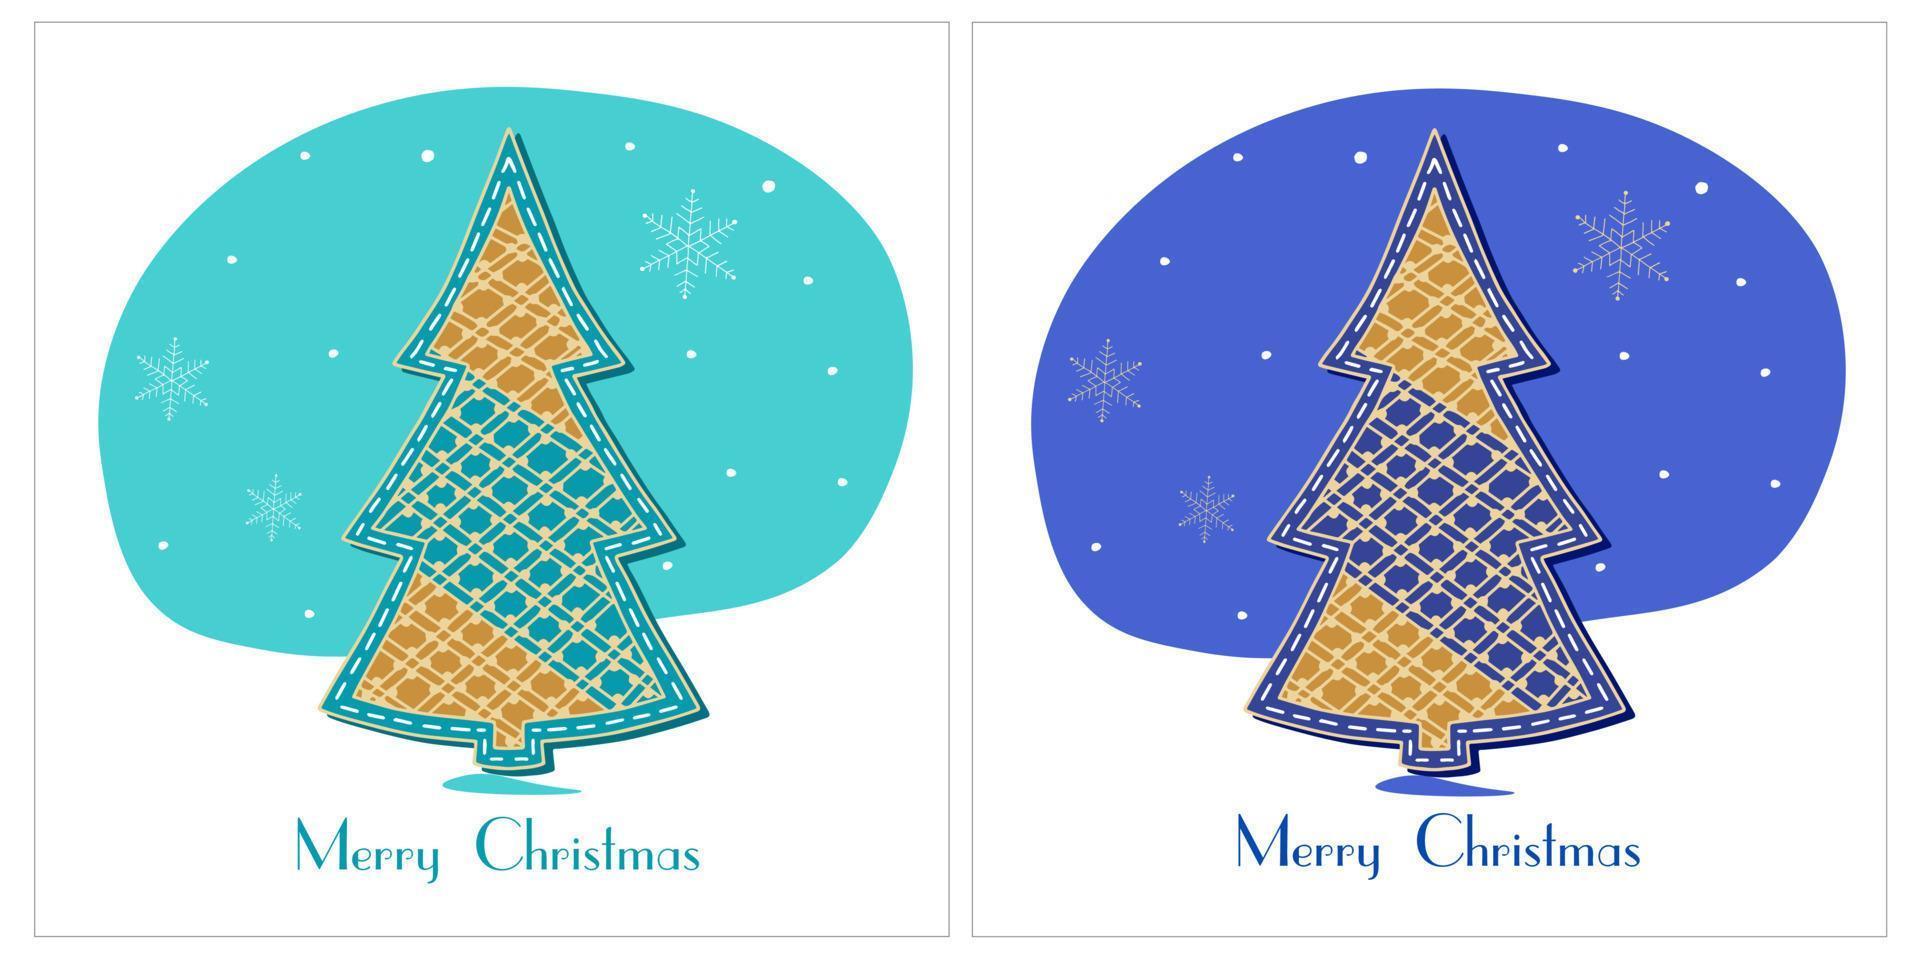 Decorative Christmas tree pattern for greeting card or sticker on turquoise and blue background vector